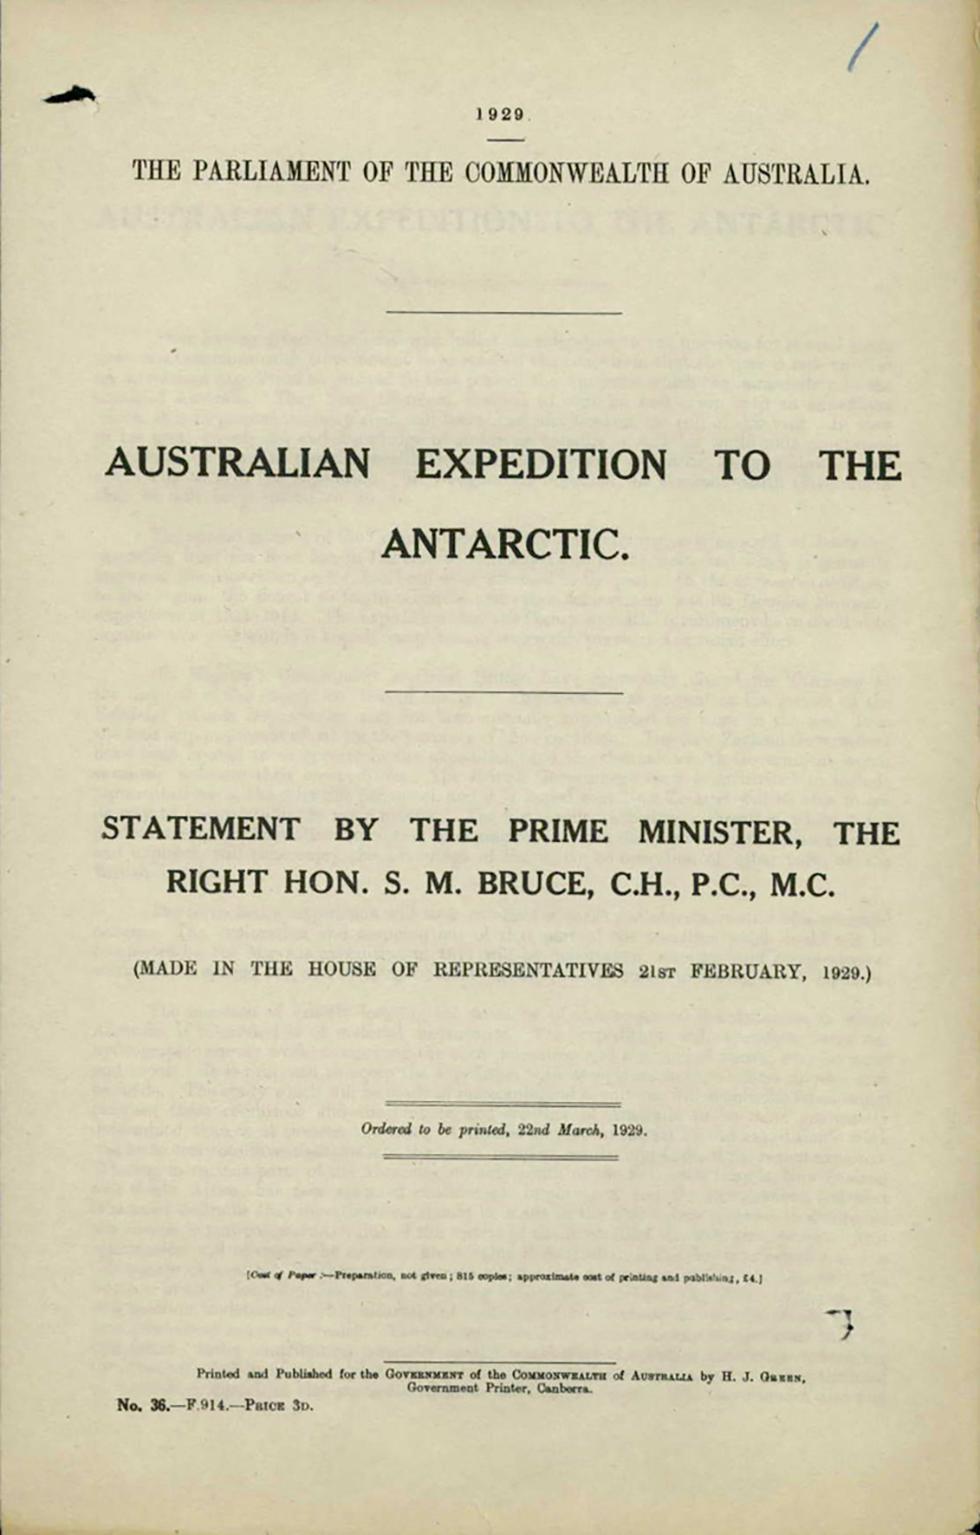 Statement made to the Australian Parliament by Prime Minister Stanley Melbourne Bruce on a proposed Australian expedition to the Antarctic.